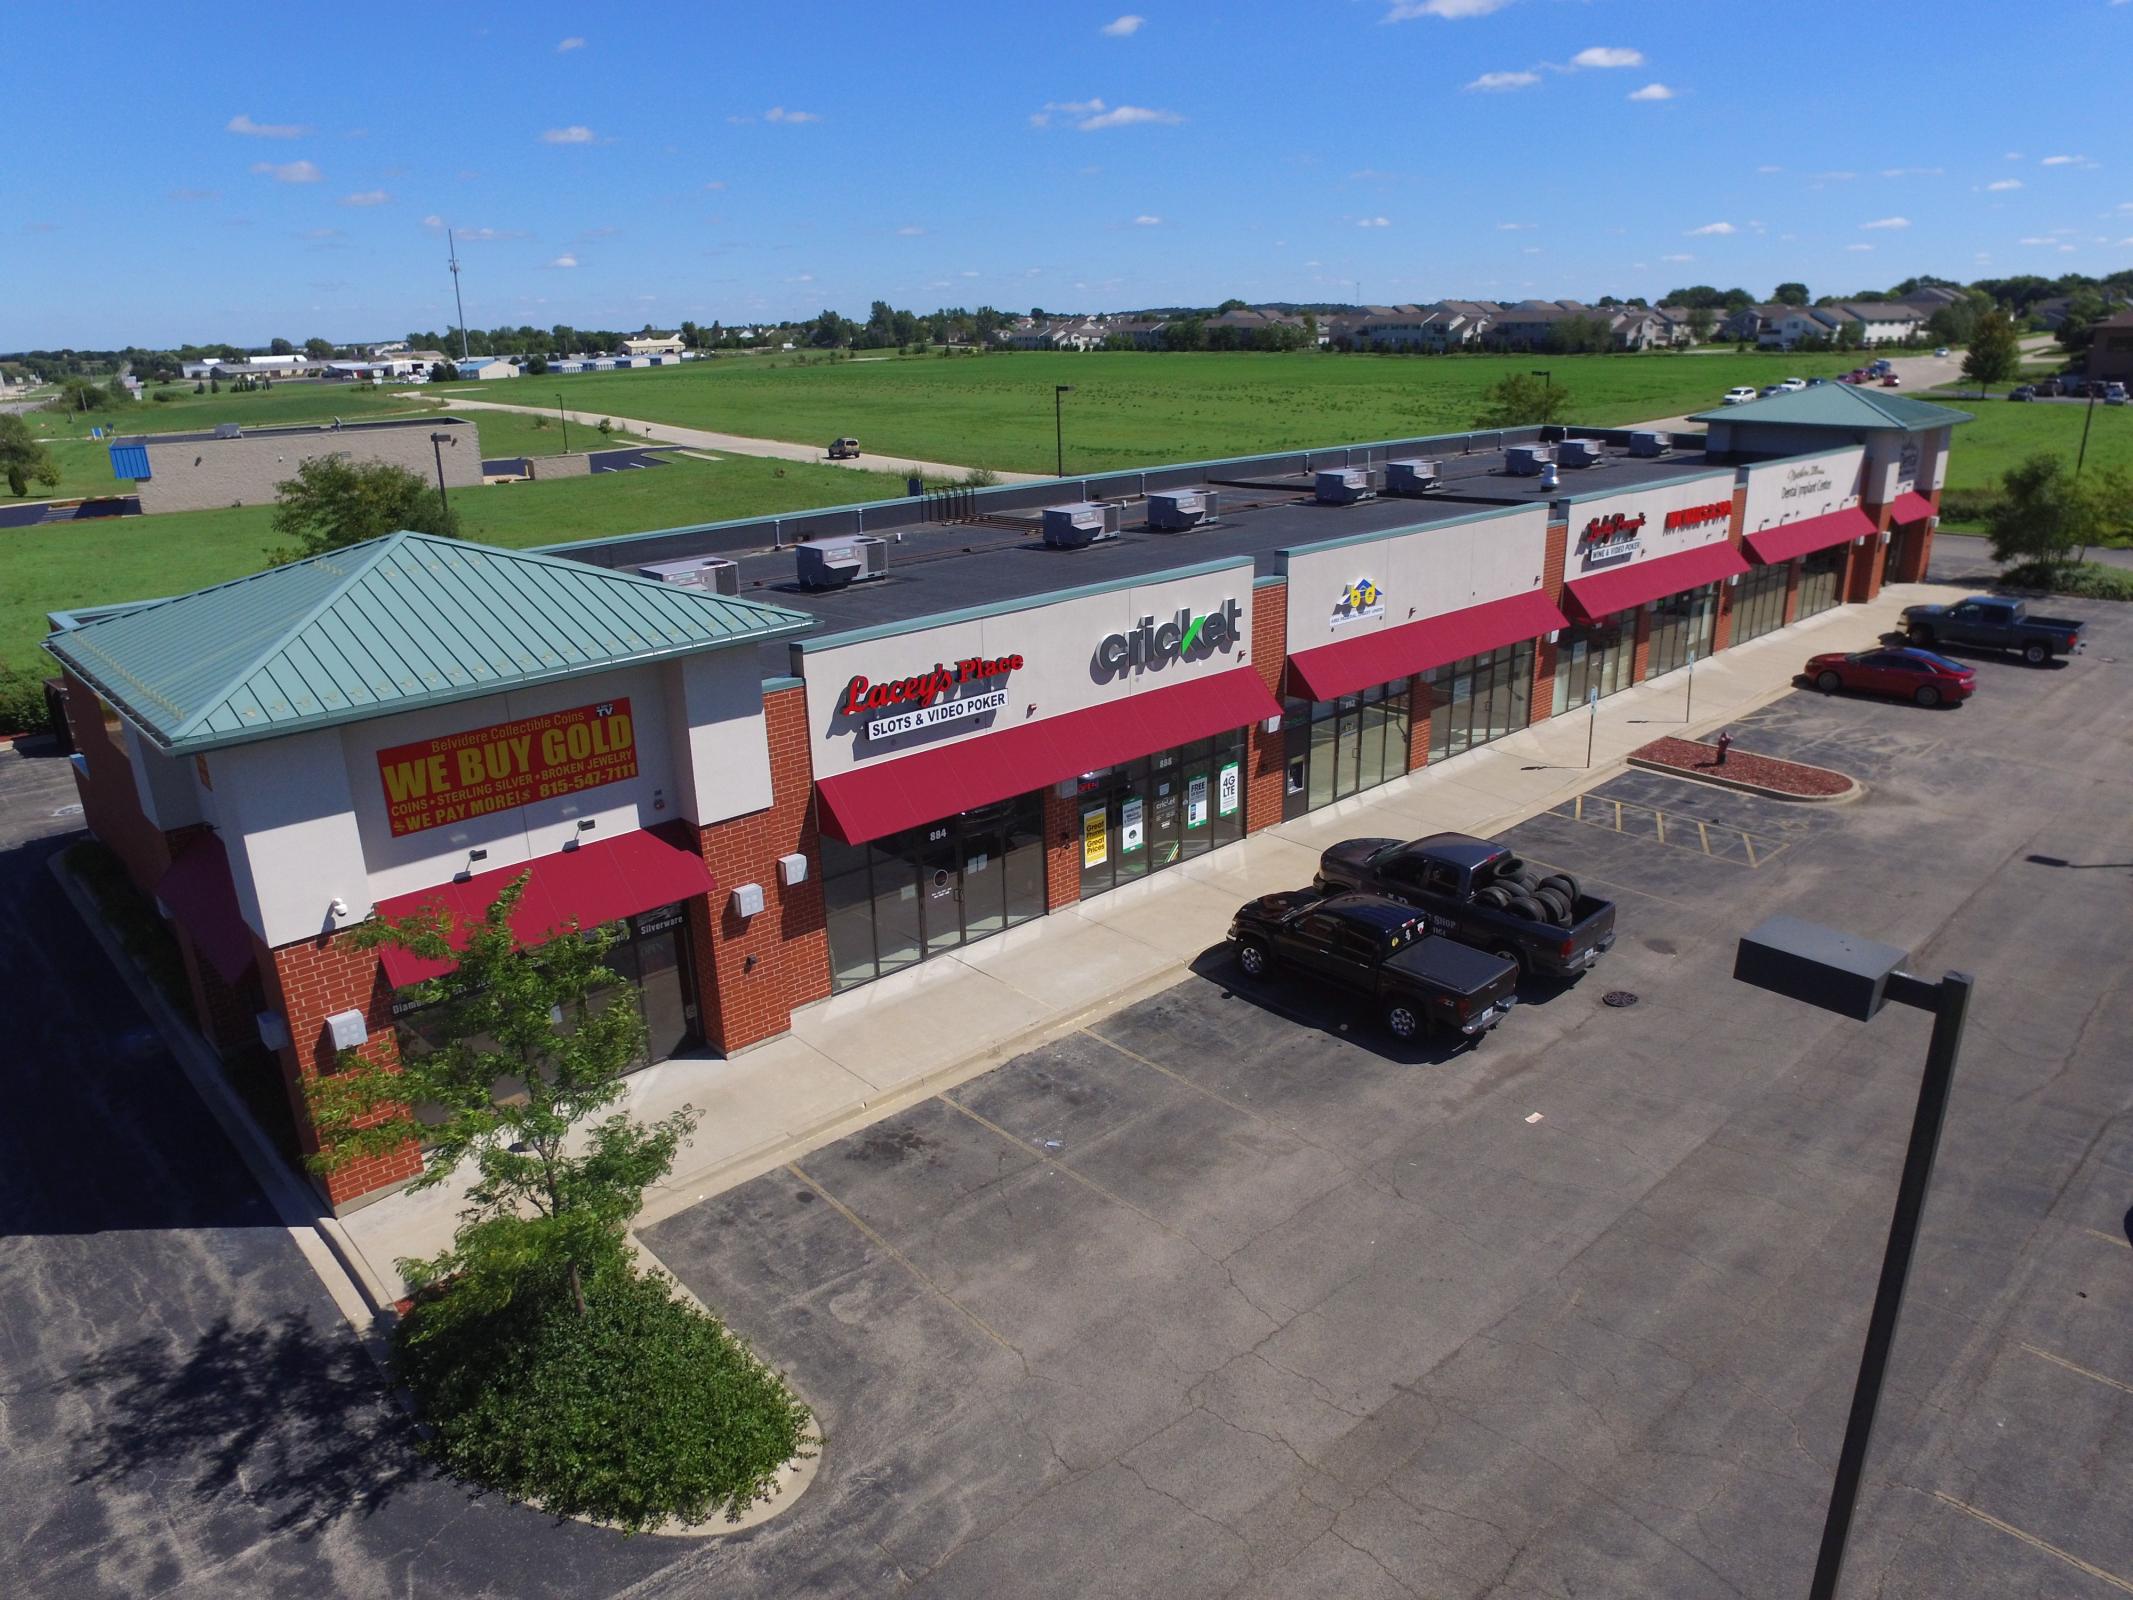 Main Photo For Retail Property - Belvidere Rd.